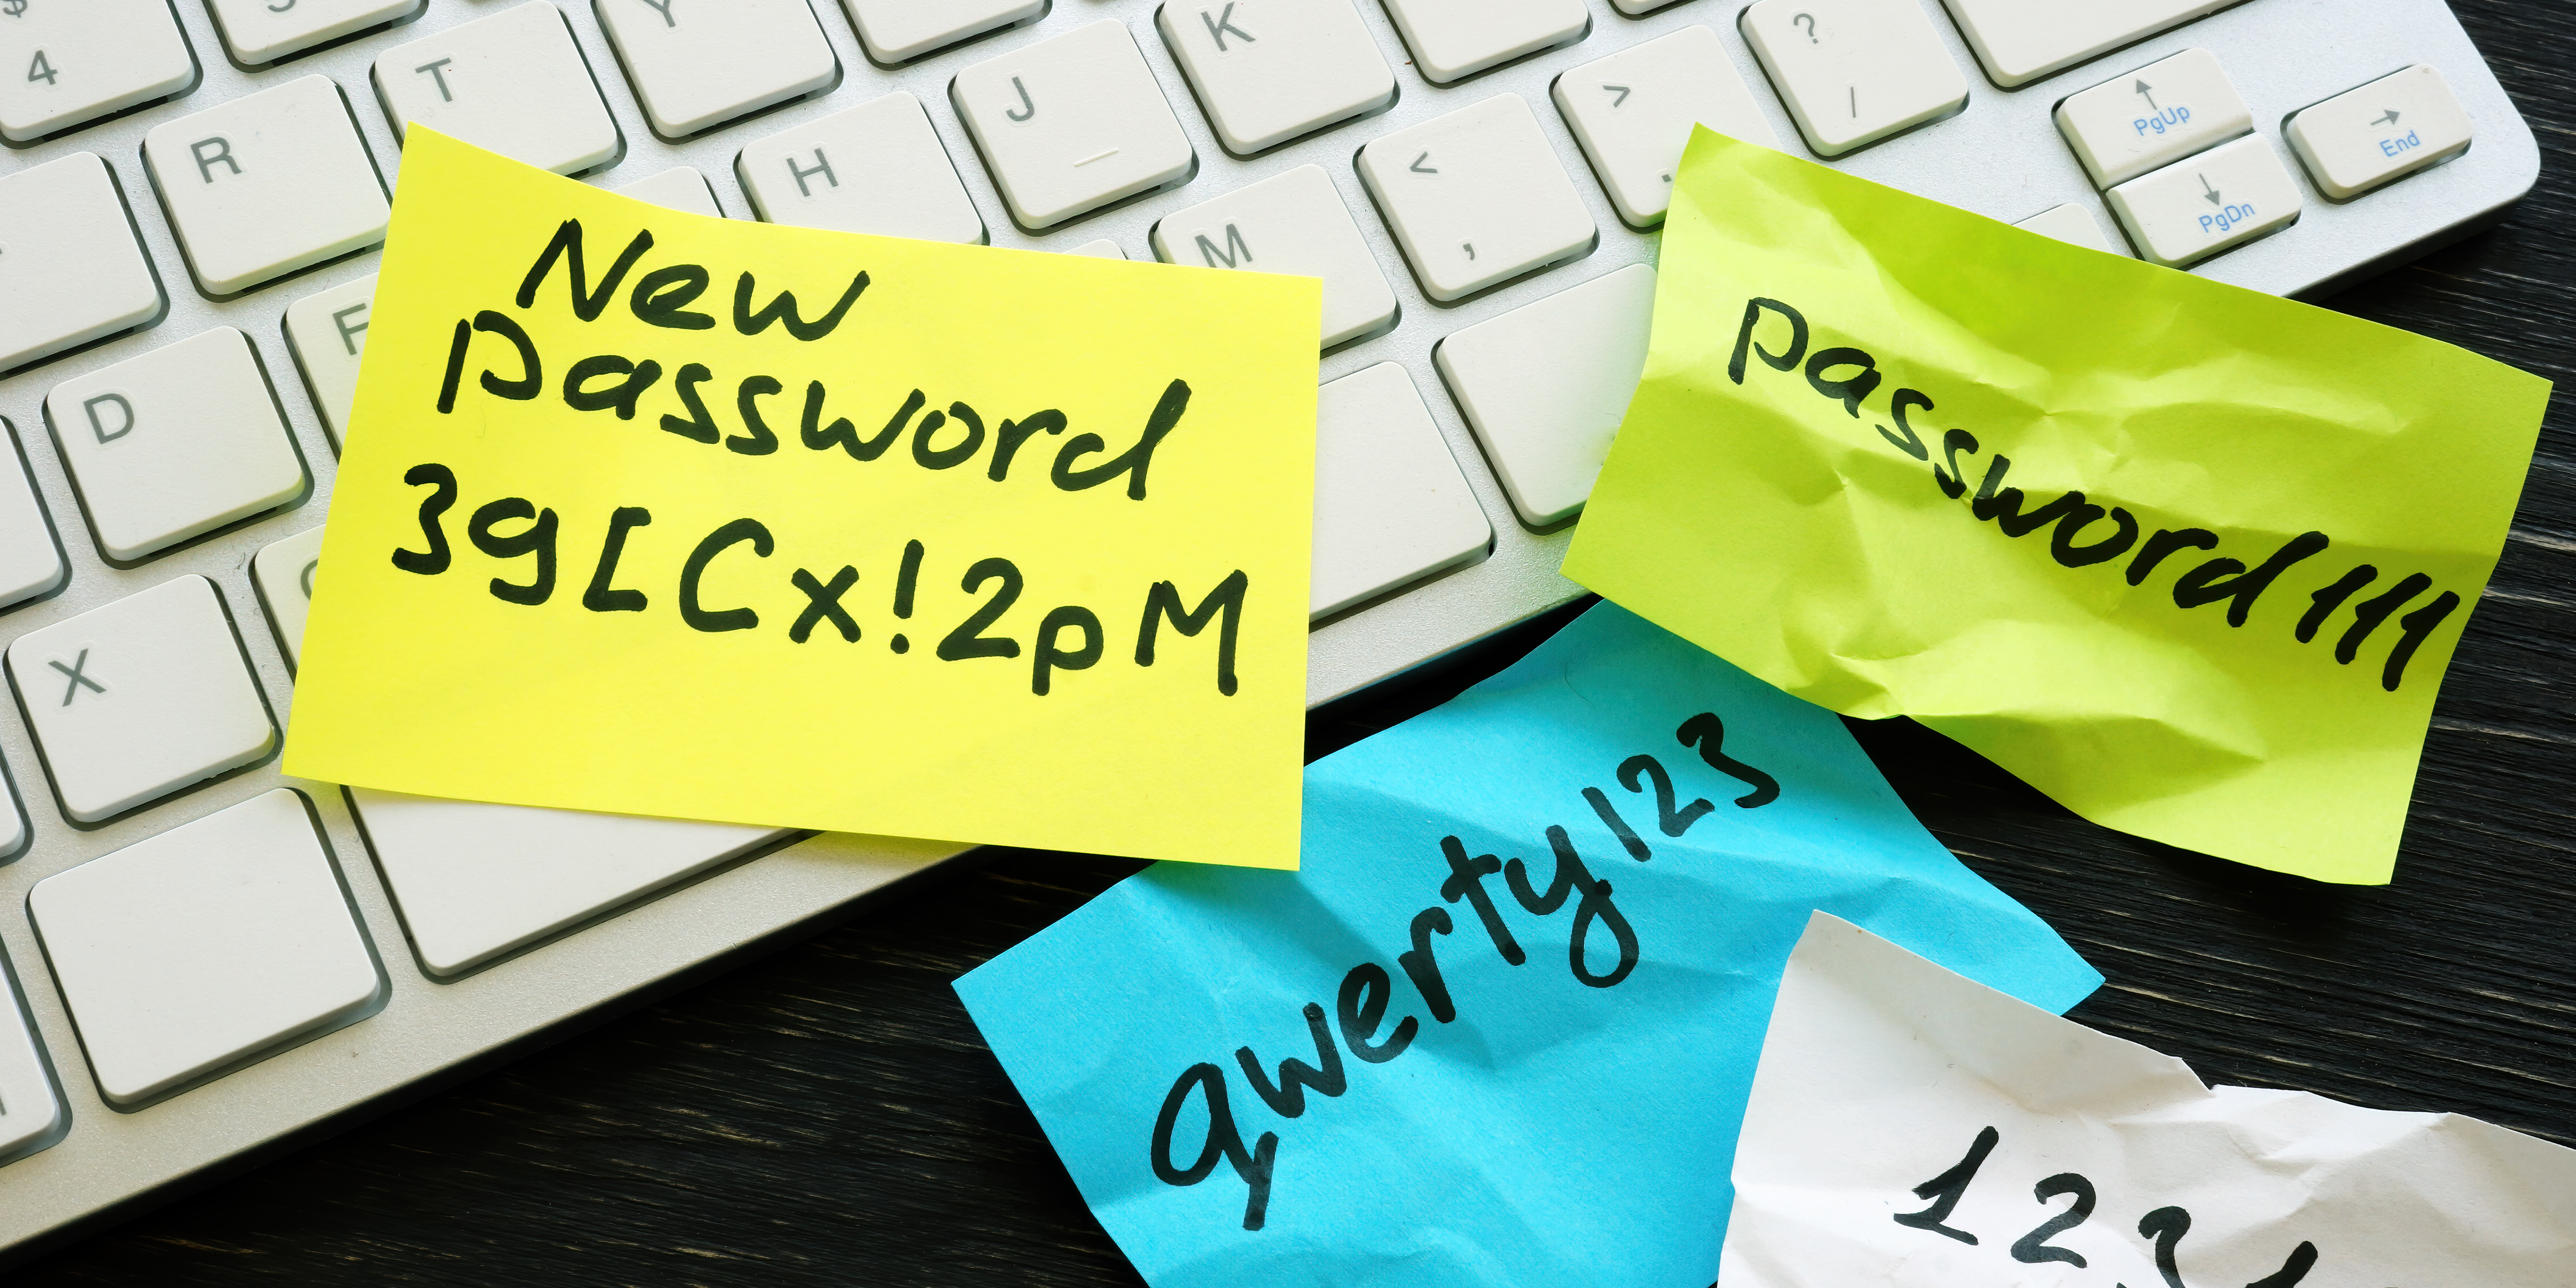 It's World Password Day! Click here if you forgot.